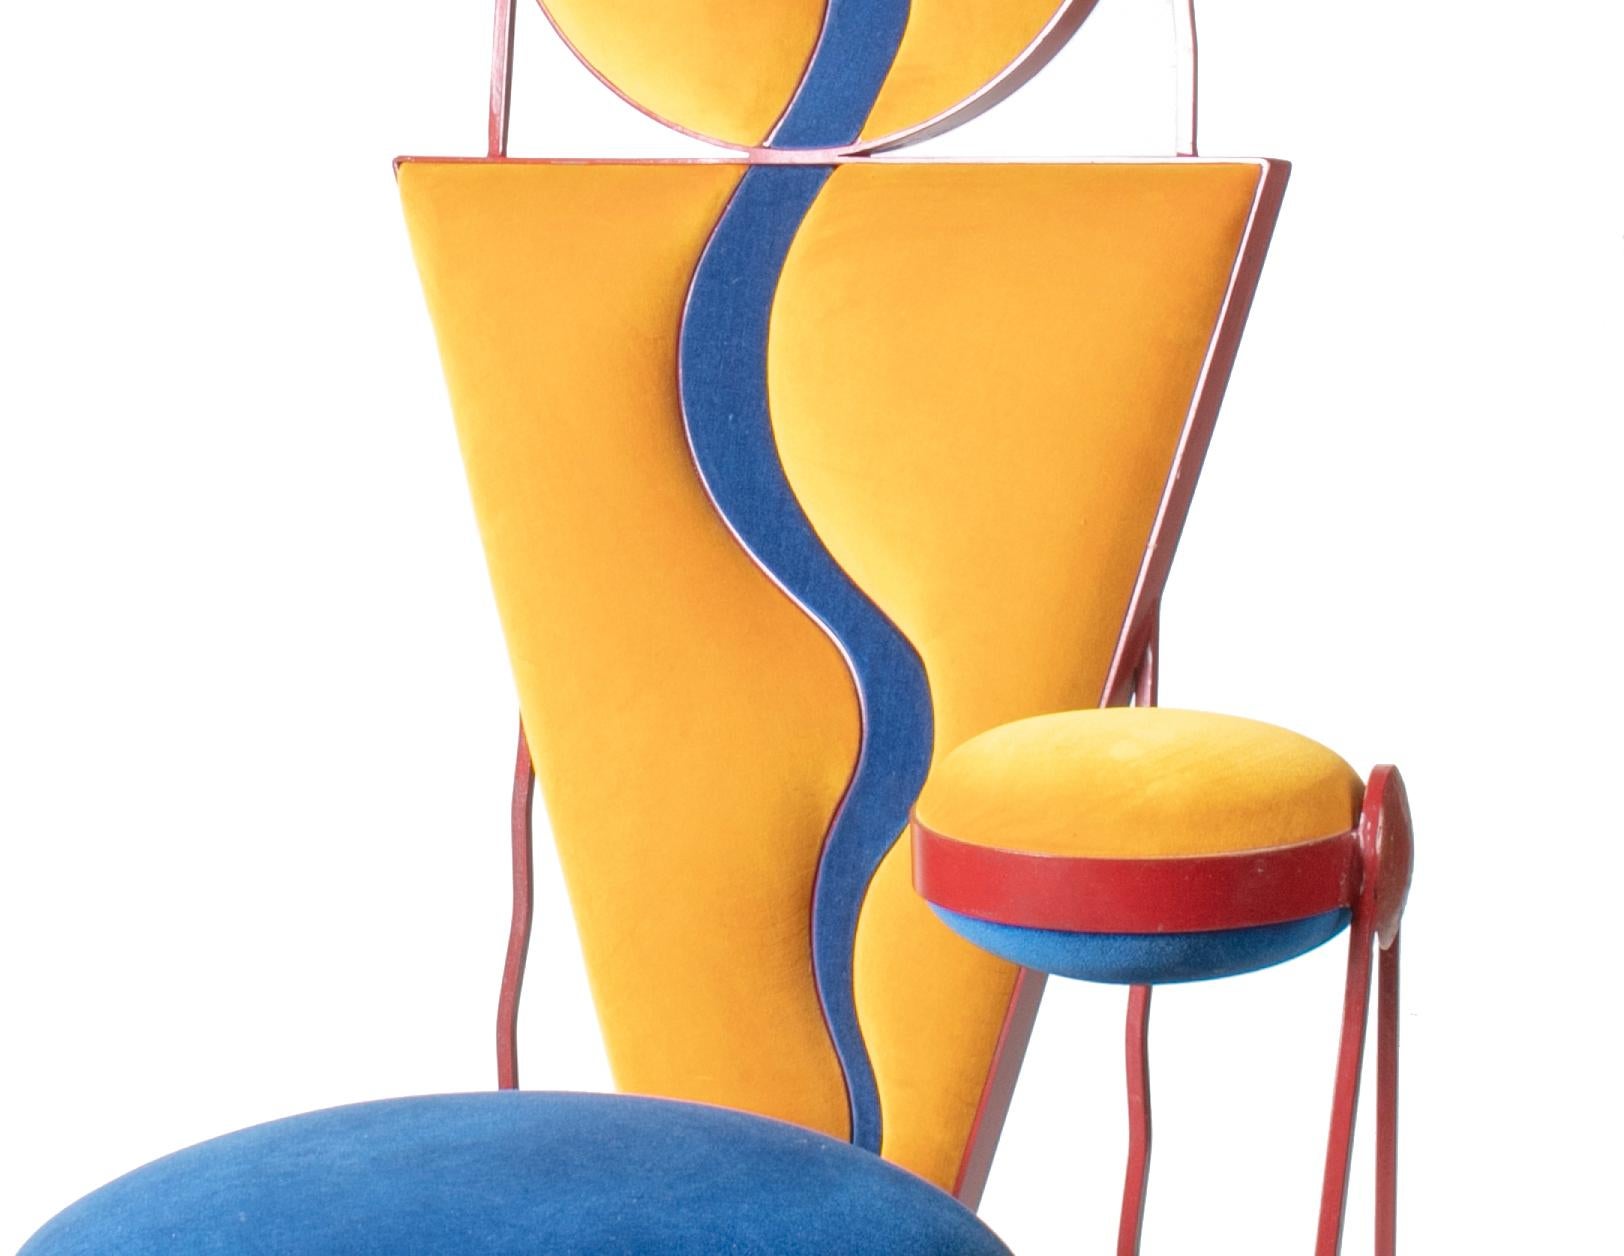 1980s German abstract design upholstered iron tall back chair.